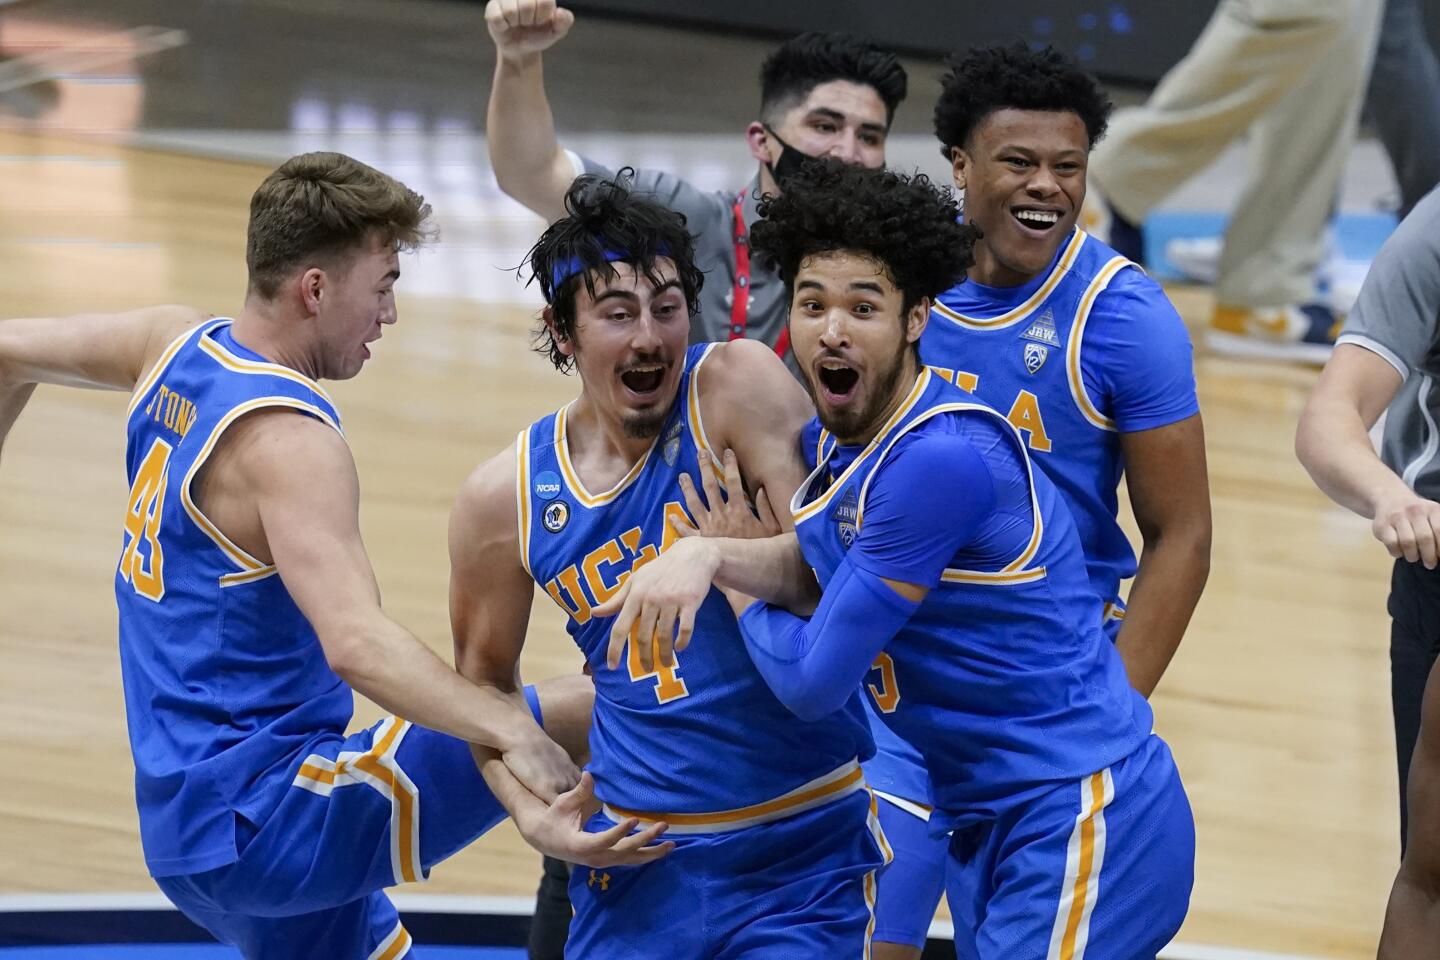 UCLA players celebrate after an Elite 8 game against Michigan in the NCAA men's college basketball tournament.